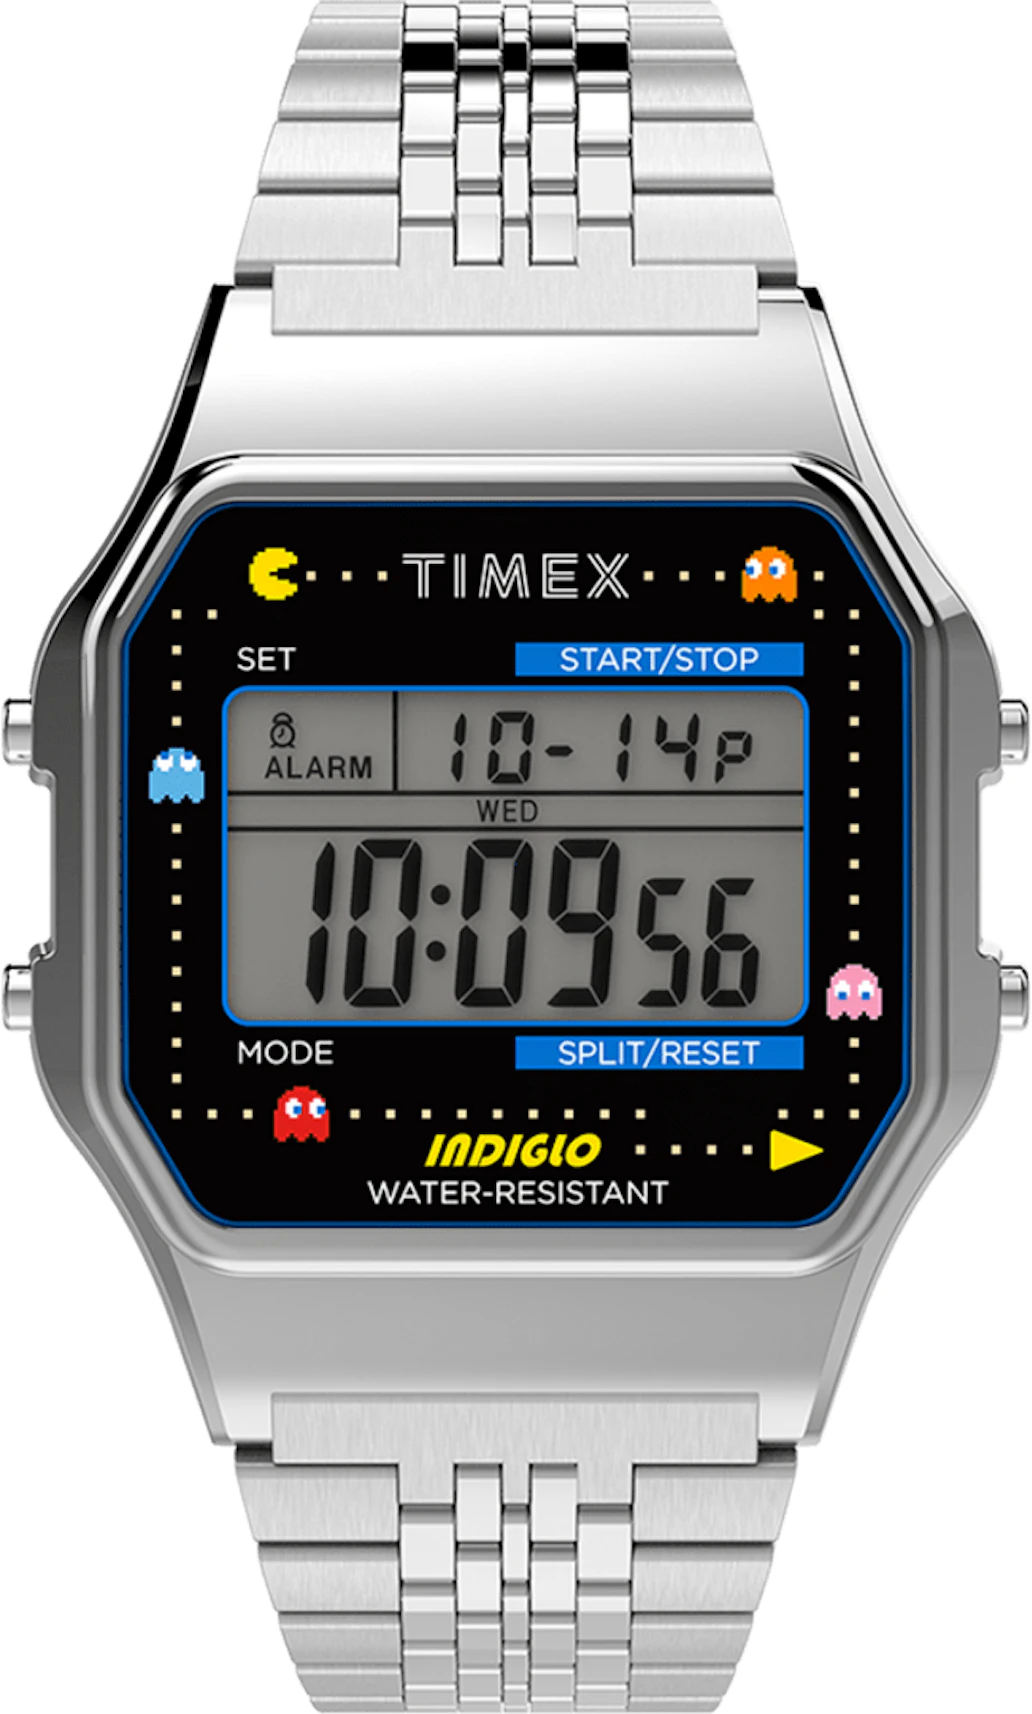 Timex T80 x PAC-MAN TW2U31900 - 34mm in Stainless Steel - US